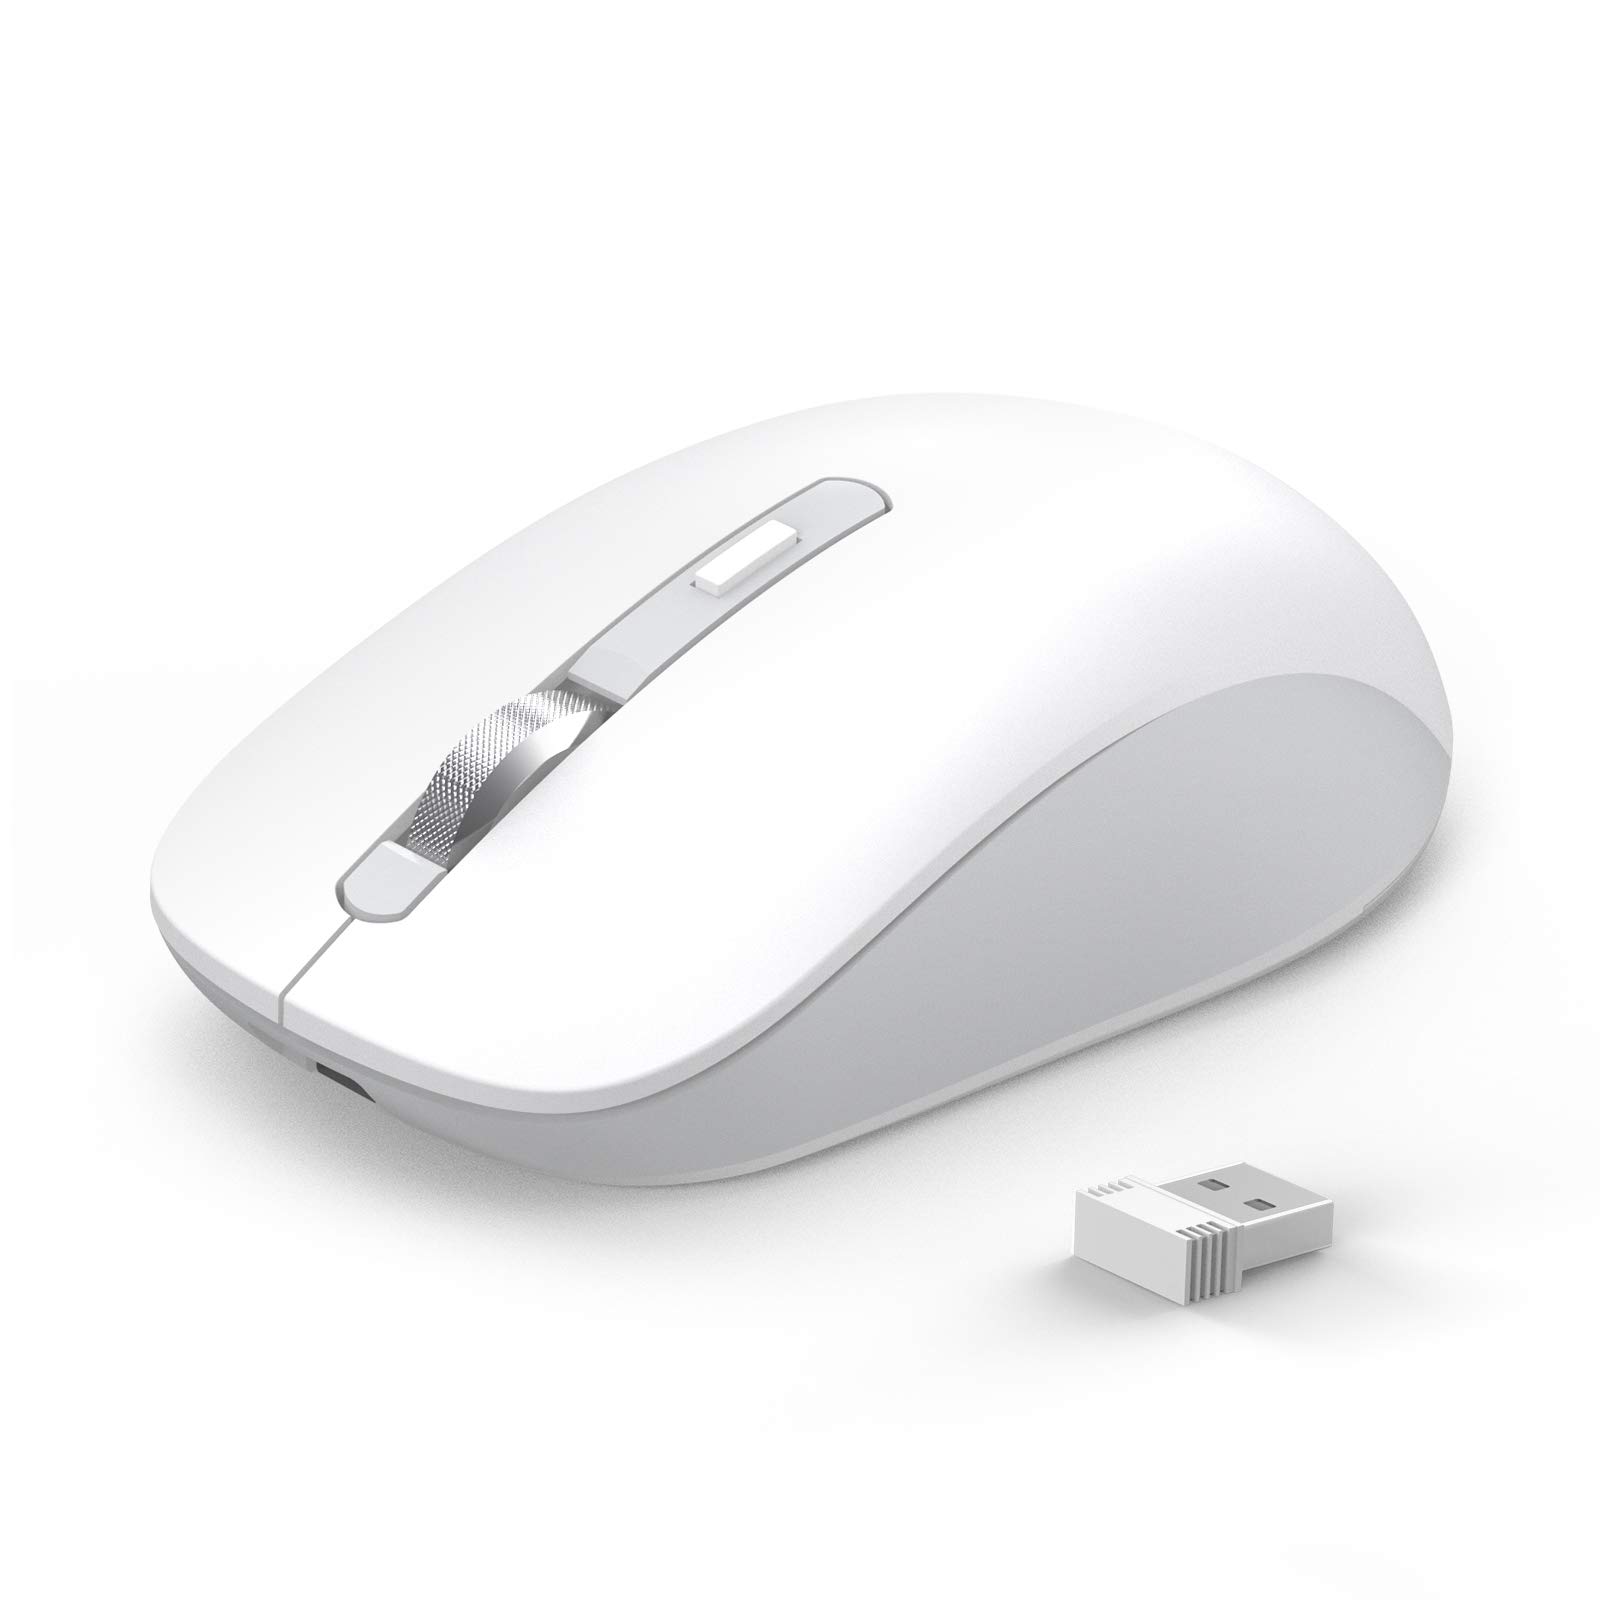 Bluetooth Mouse, JOYACCESS 2.4G Wireless Bluetooth Mouse Dual Mode(Bluetooth 5.0/3.0+USB), Computer Mice for Laptop/Computer MacBook/Windows/MacOS/Android - White
